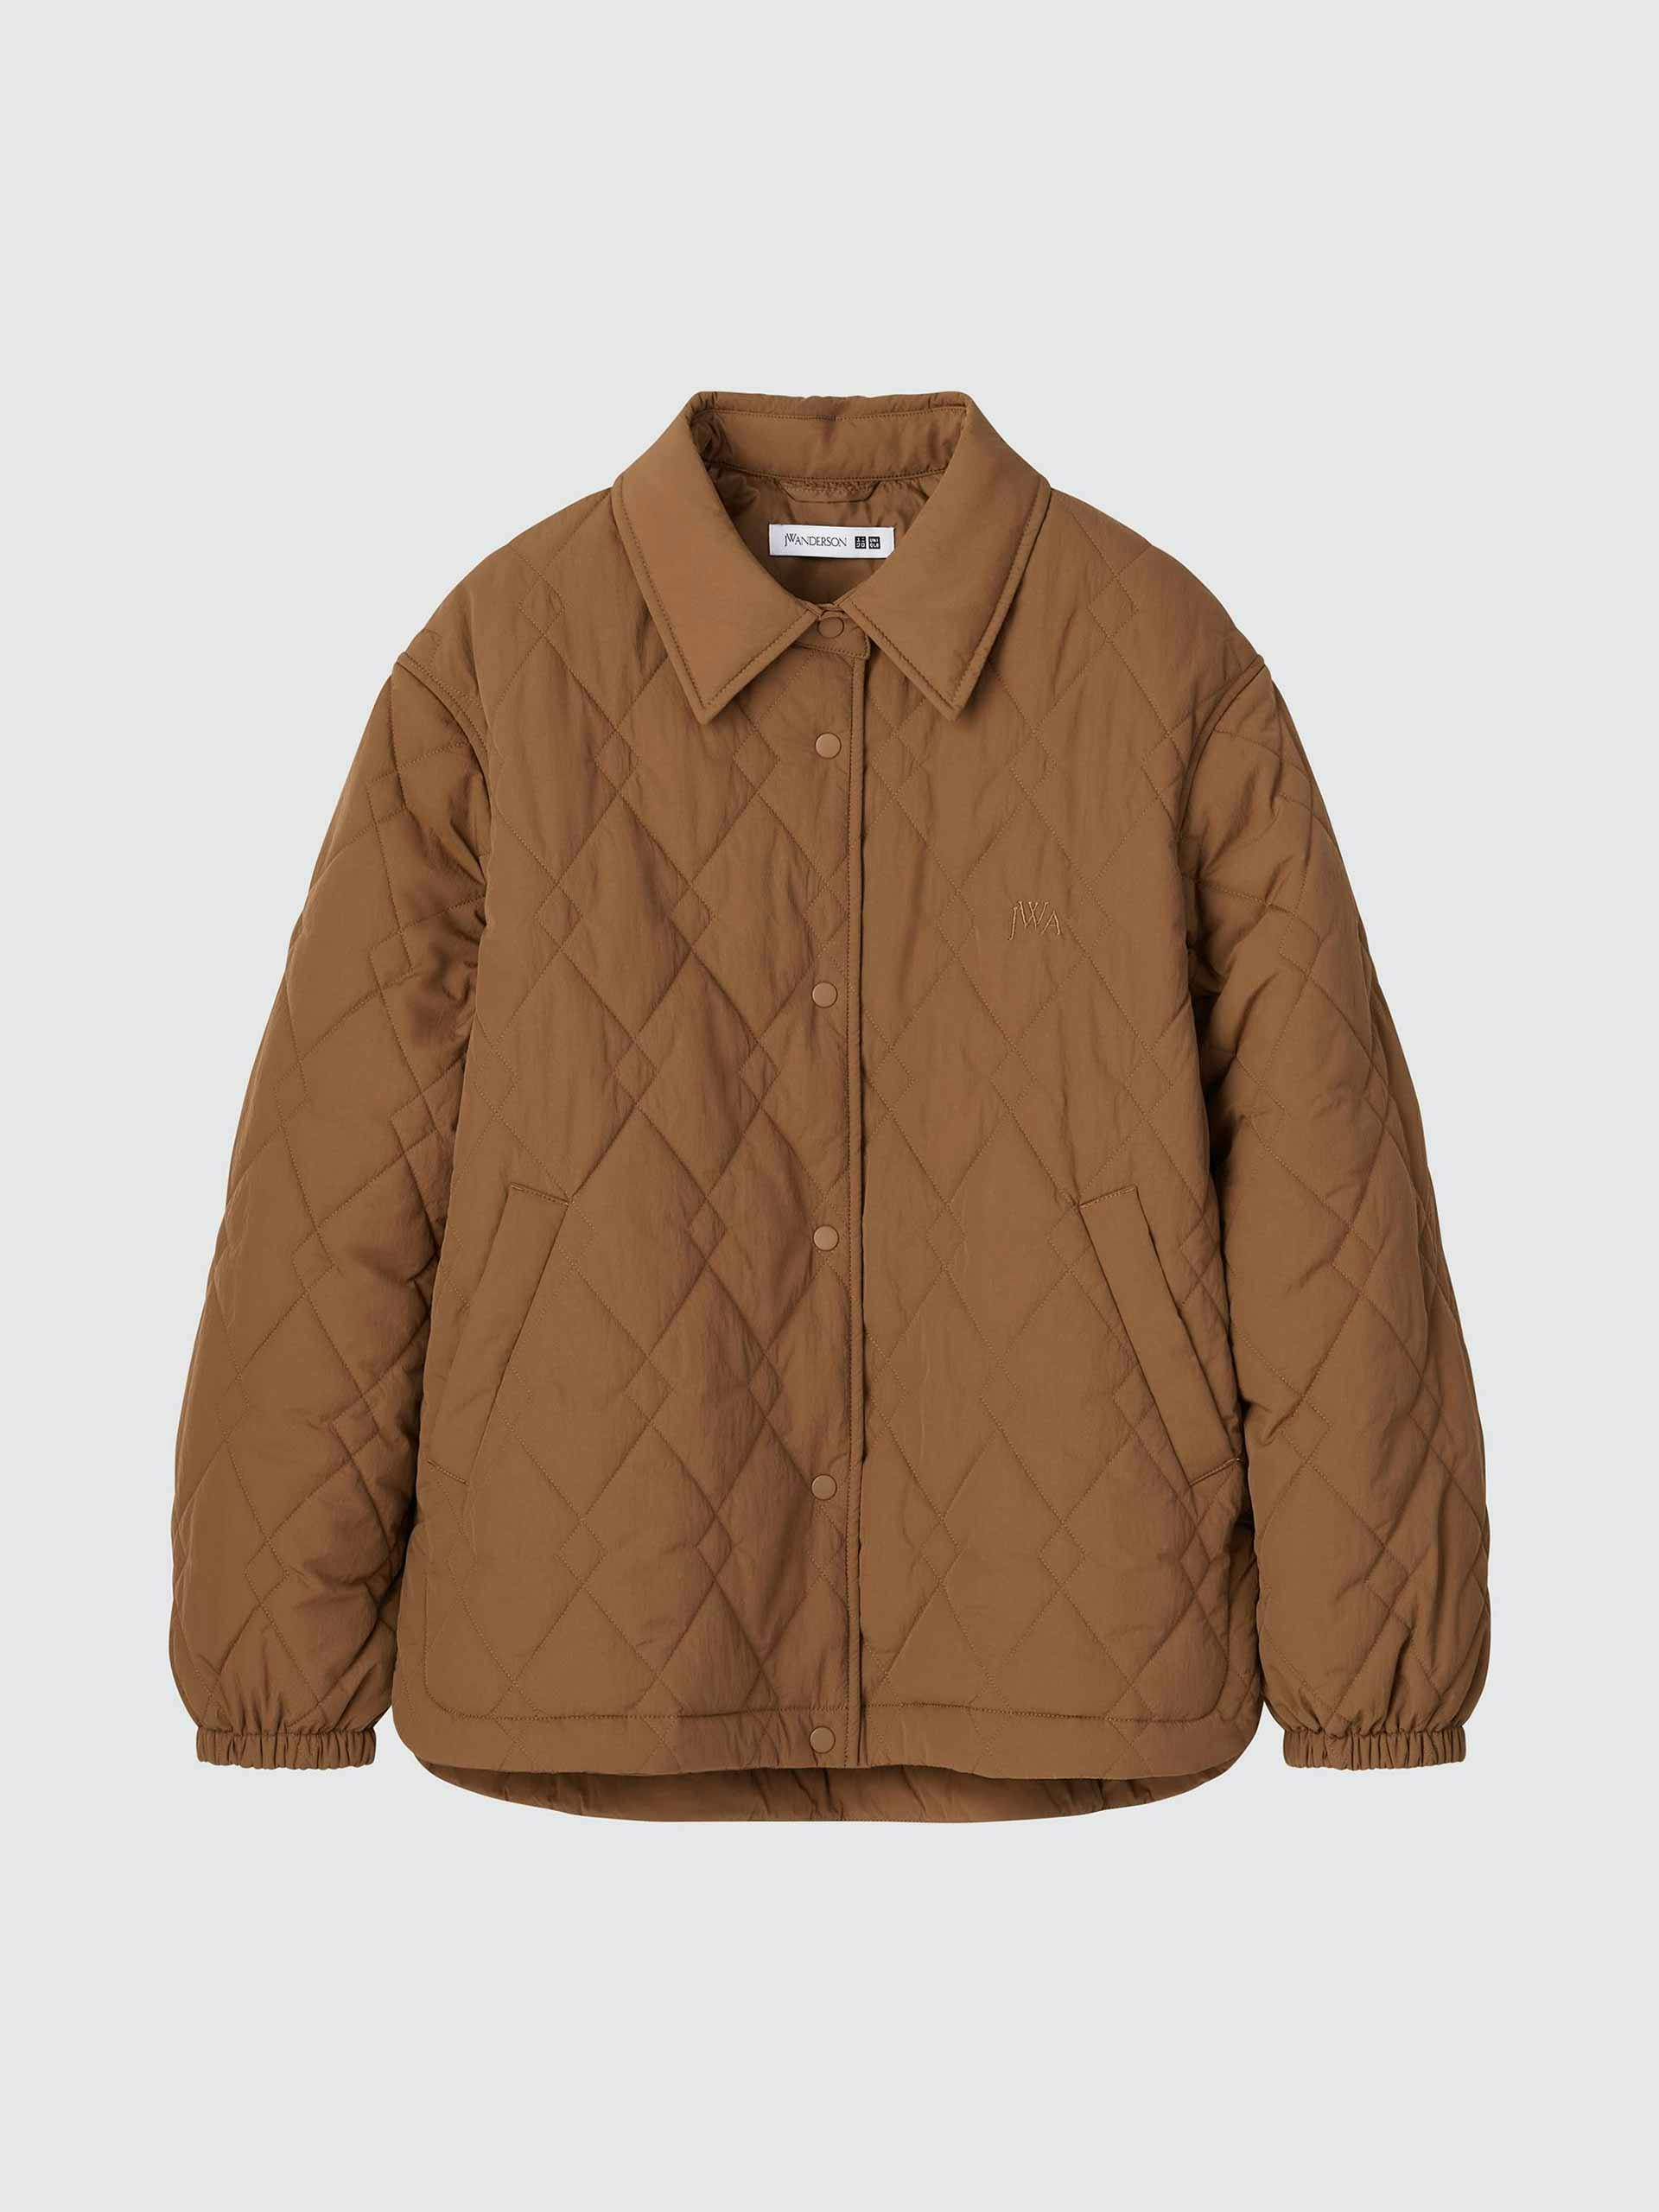 JW Anderson quilted jacket